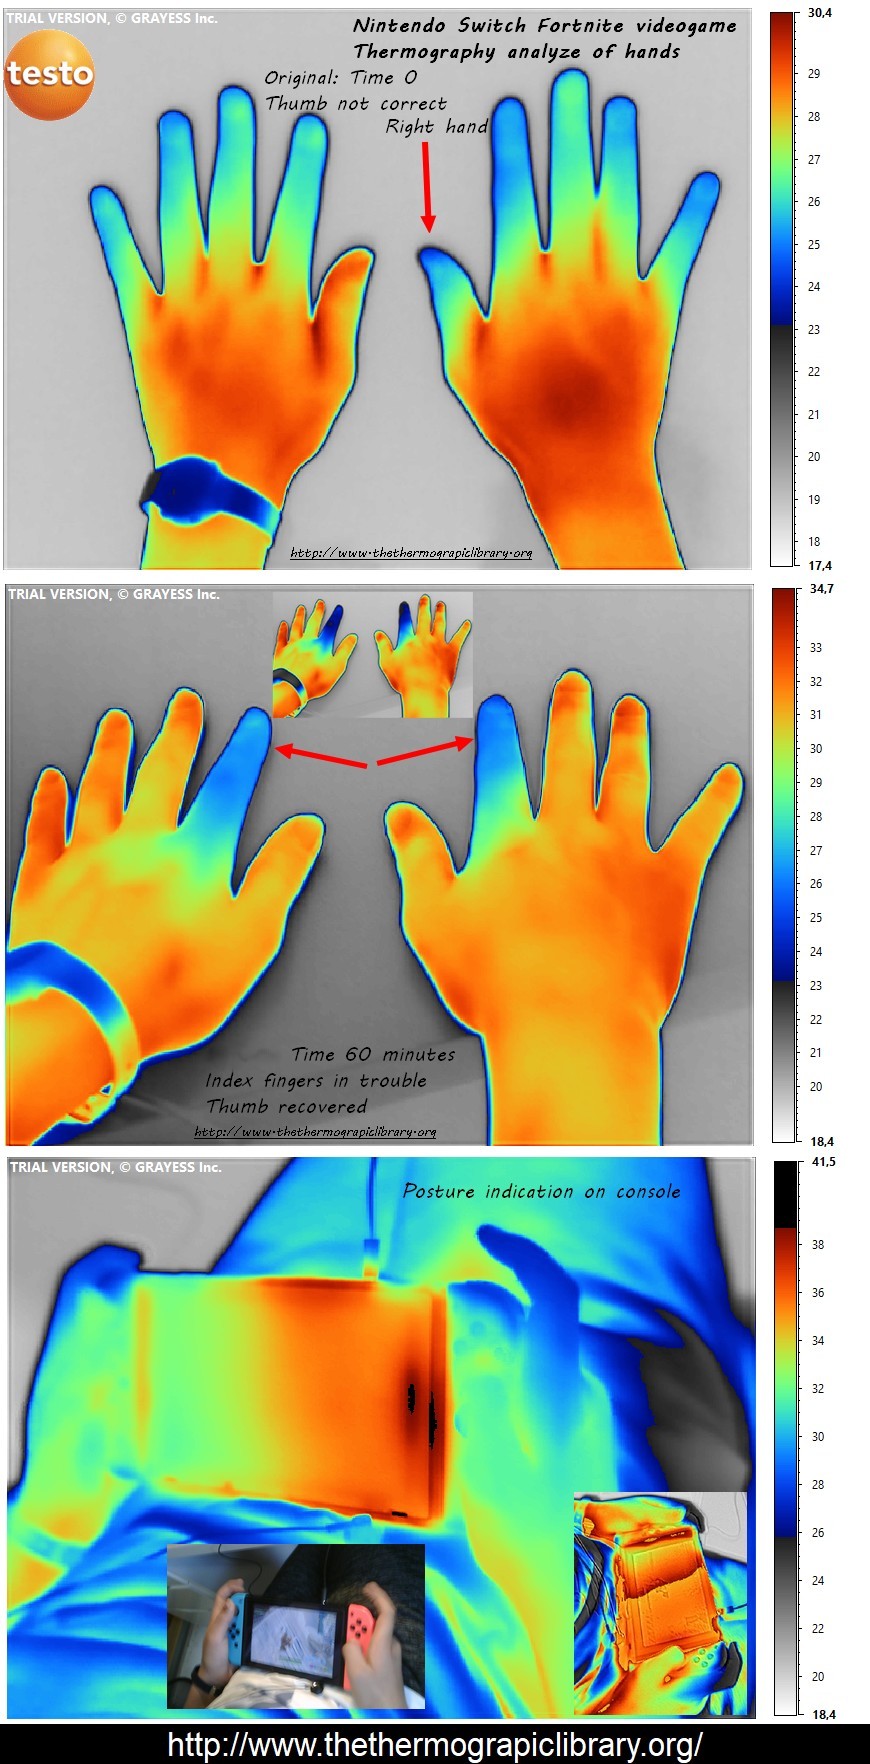 "Nintendo Switch analyze through thermography with a Fortnite game"